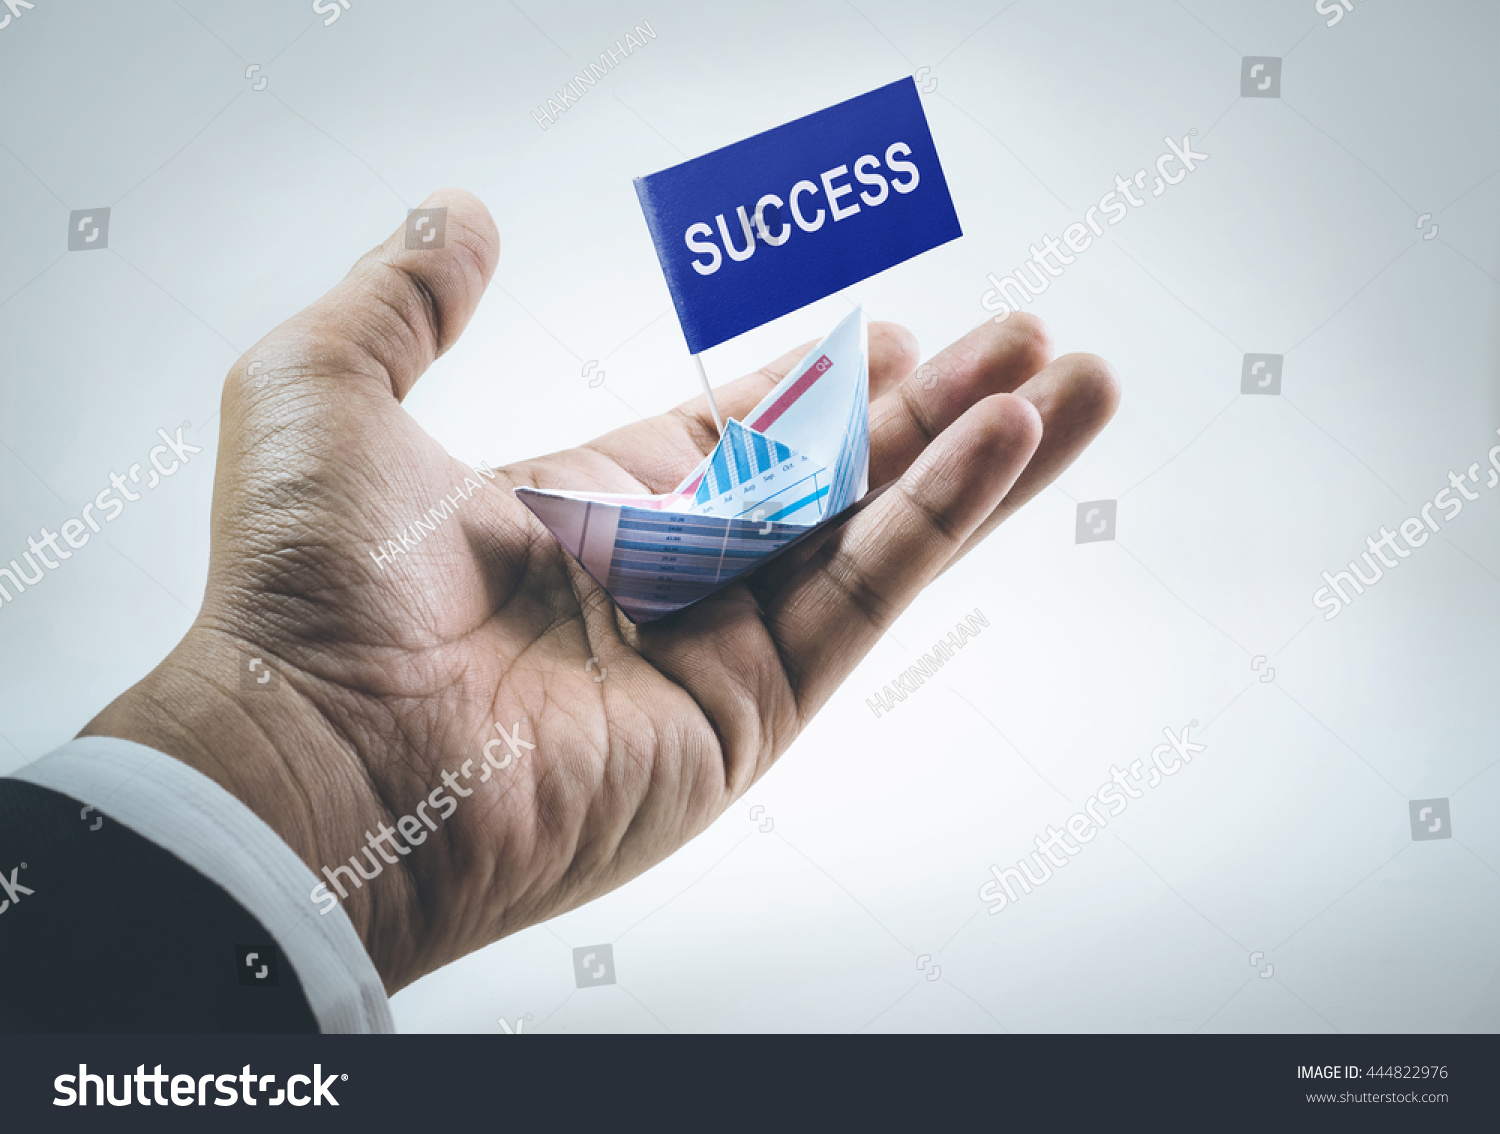 Success word on flag with boat made of paper graph in businessman hand.For business financial concept. #444822976